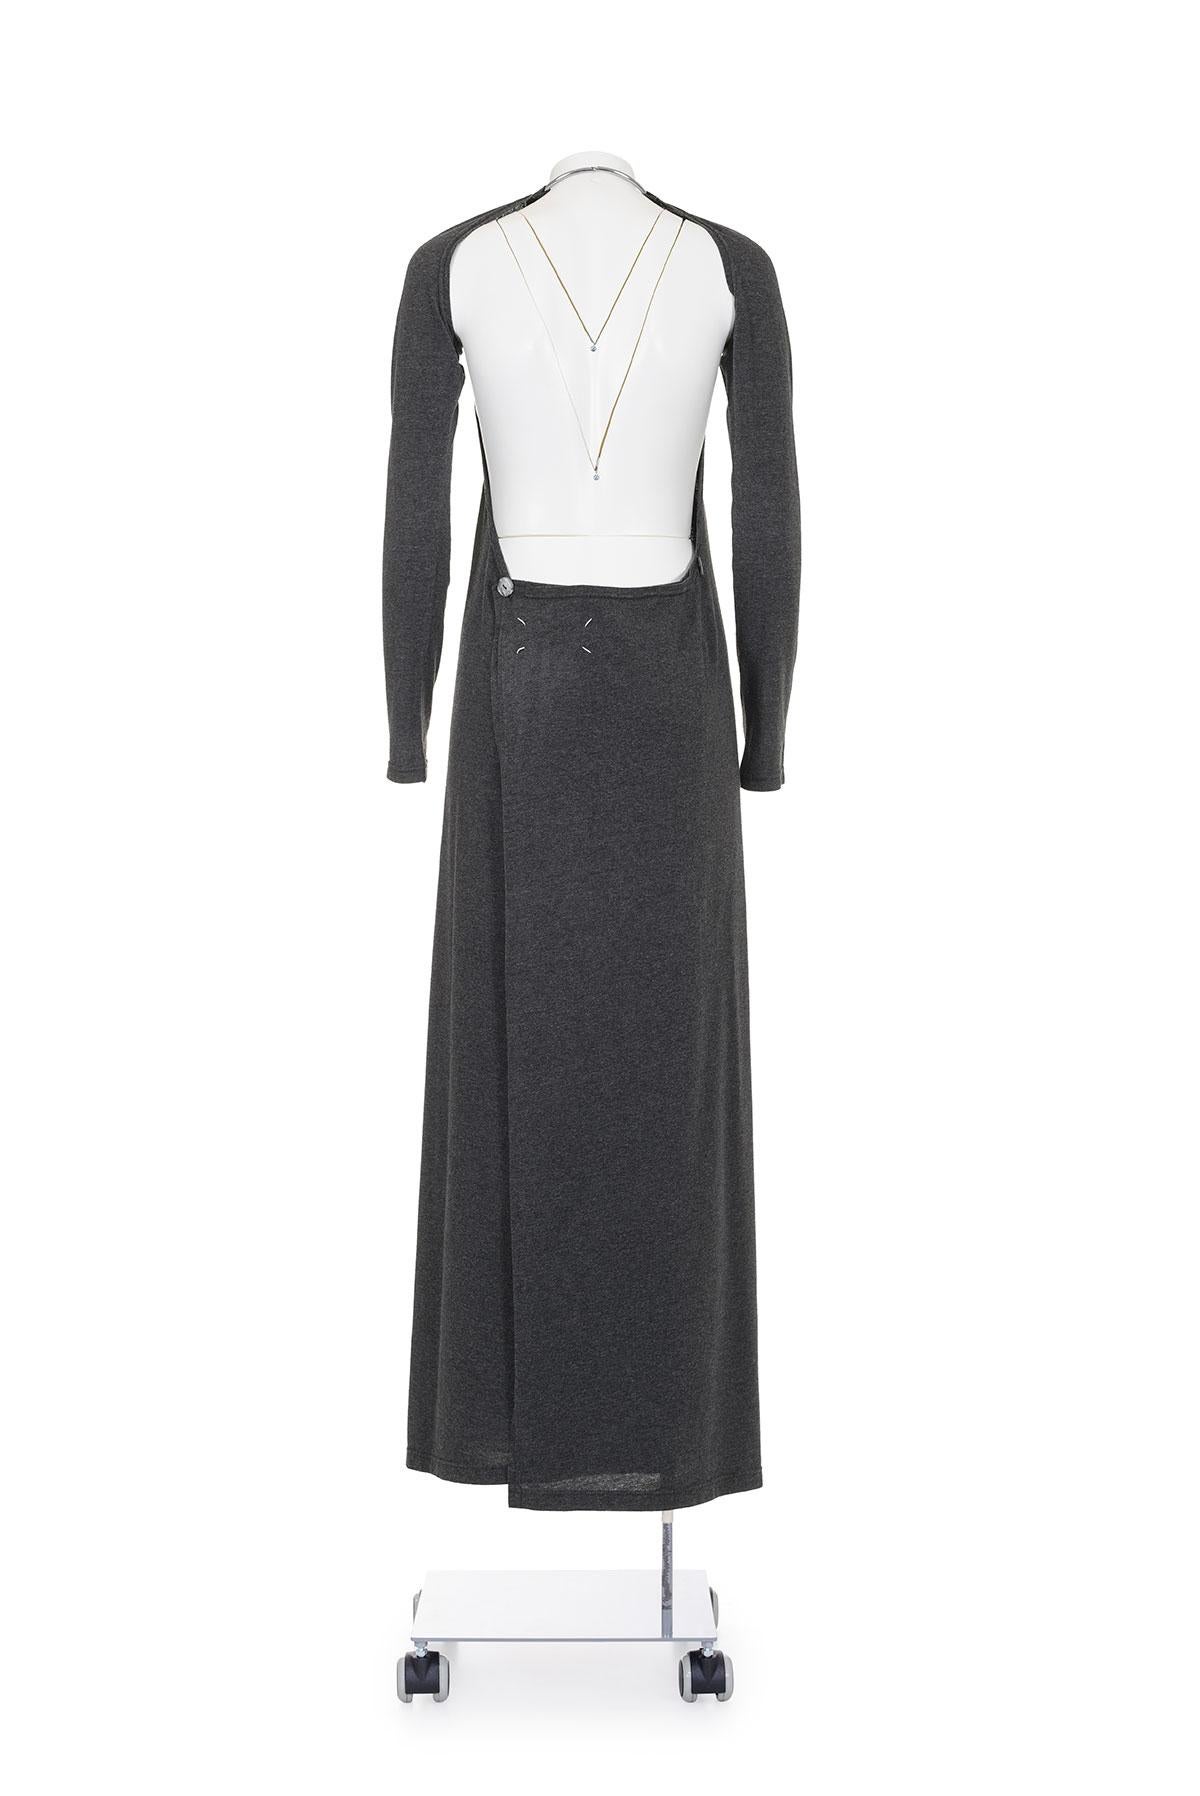 MAISON MARTIN MARGIELA SS 99 Jersey Dress with Choker  In Good Condition In Milano, MILANO